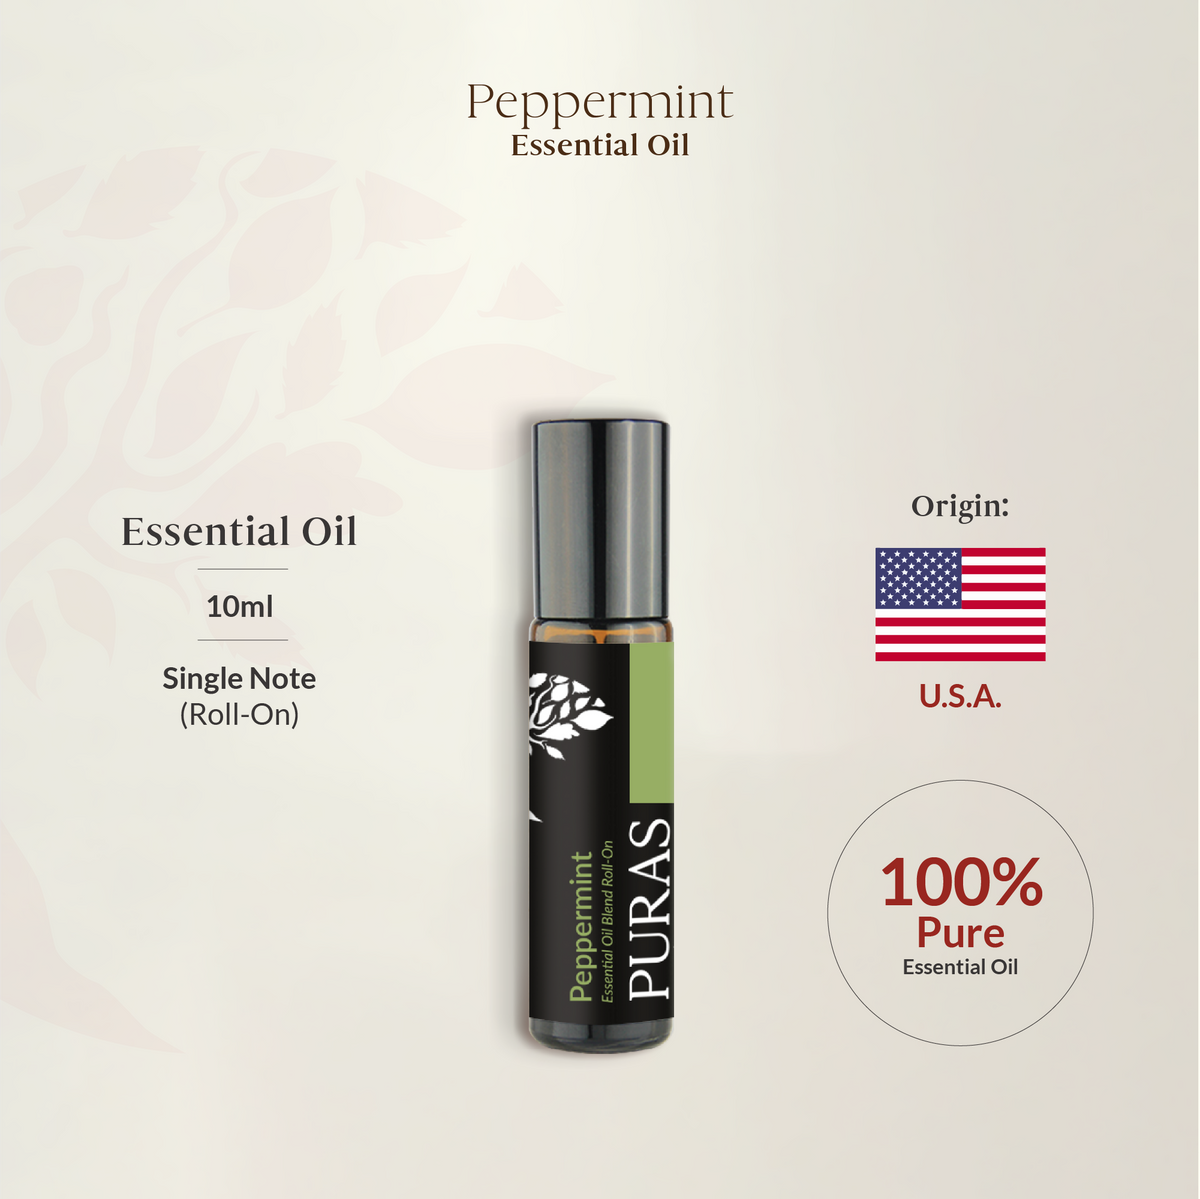 Peppermint Essential Oil (Roll-On) 10ml